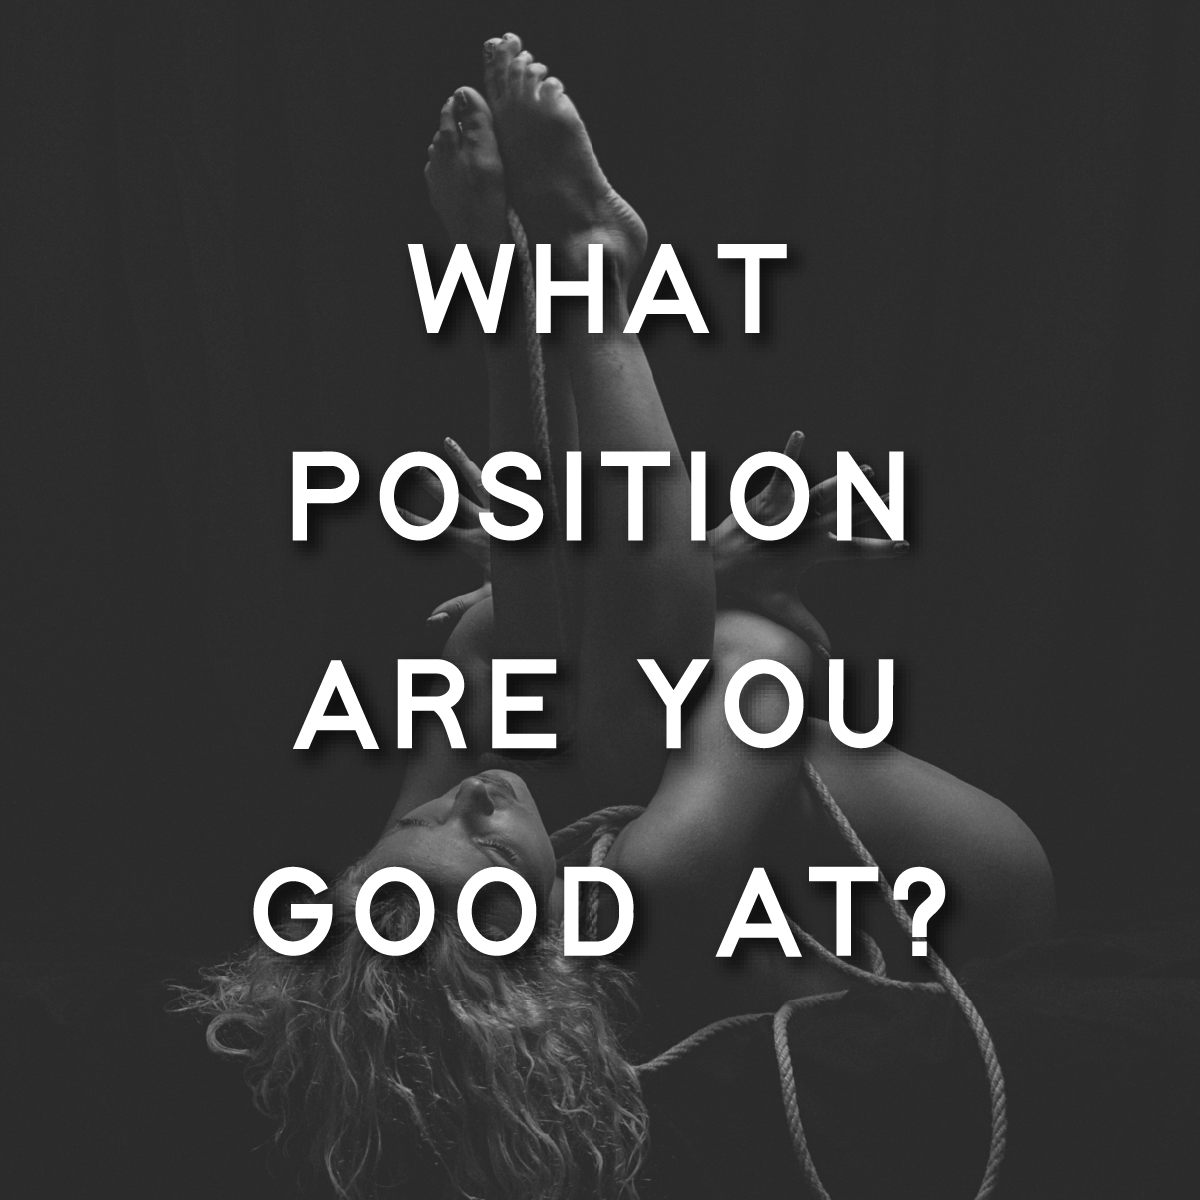 What Position Are You Good At?